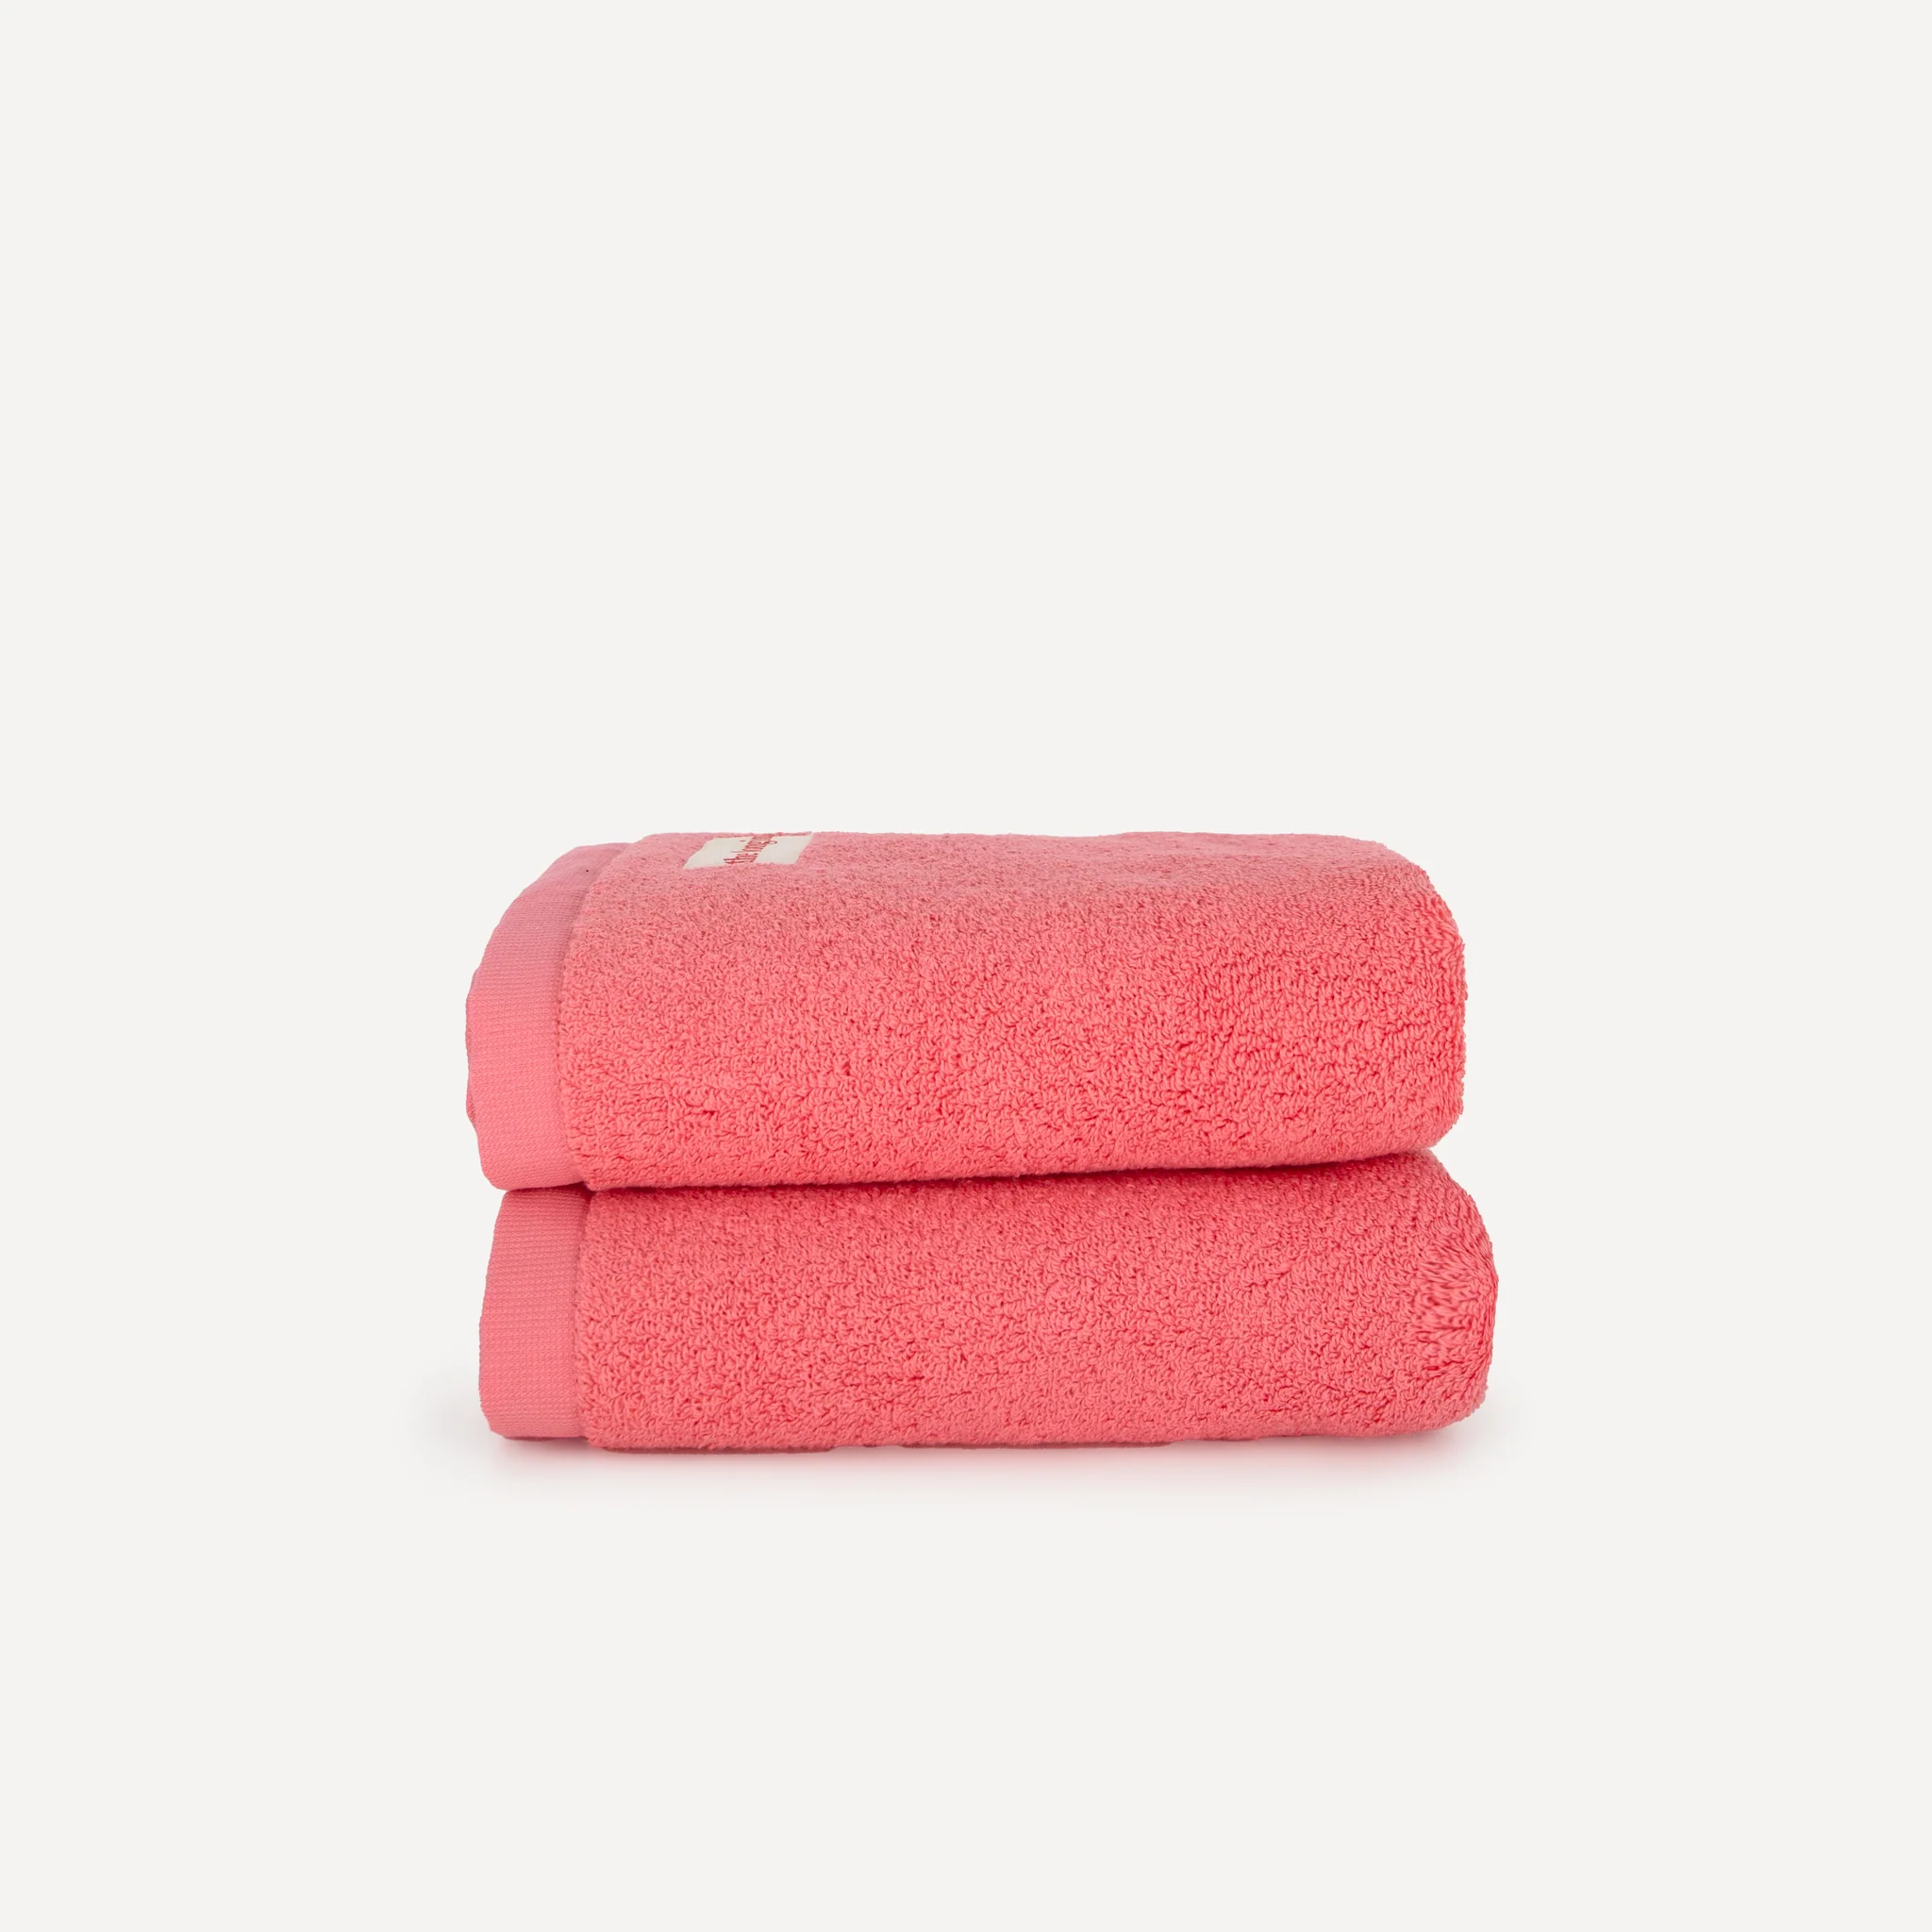 Best kitchen towels for drying hands